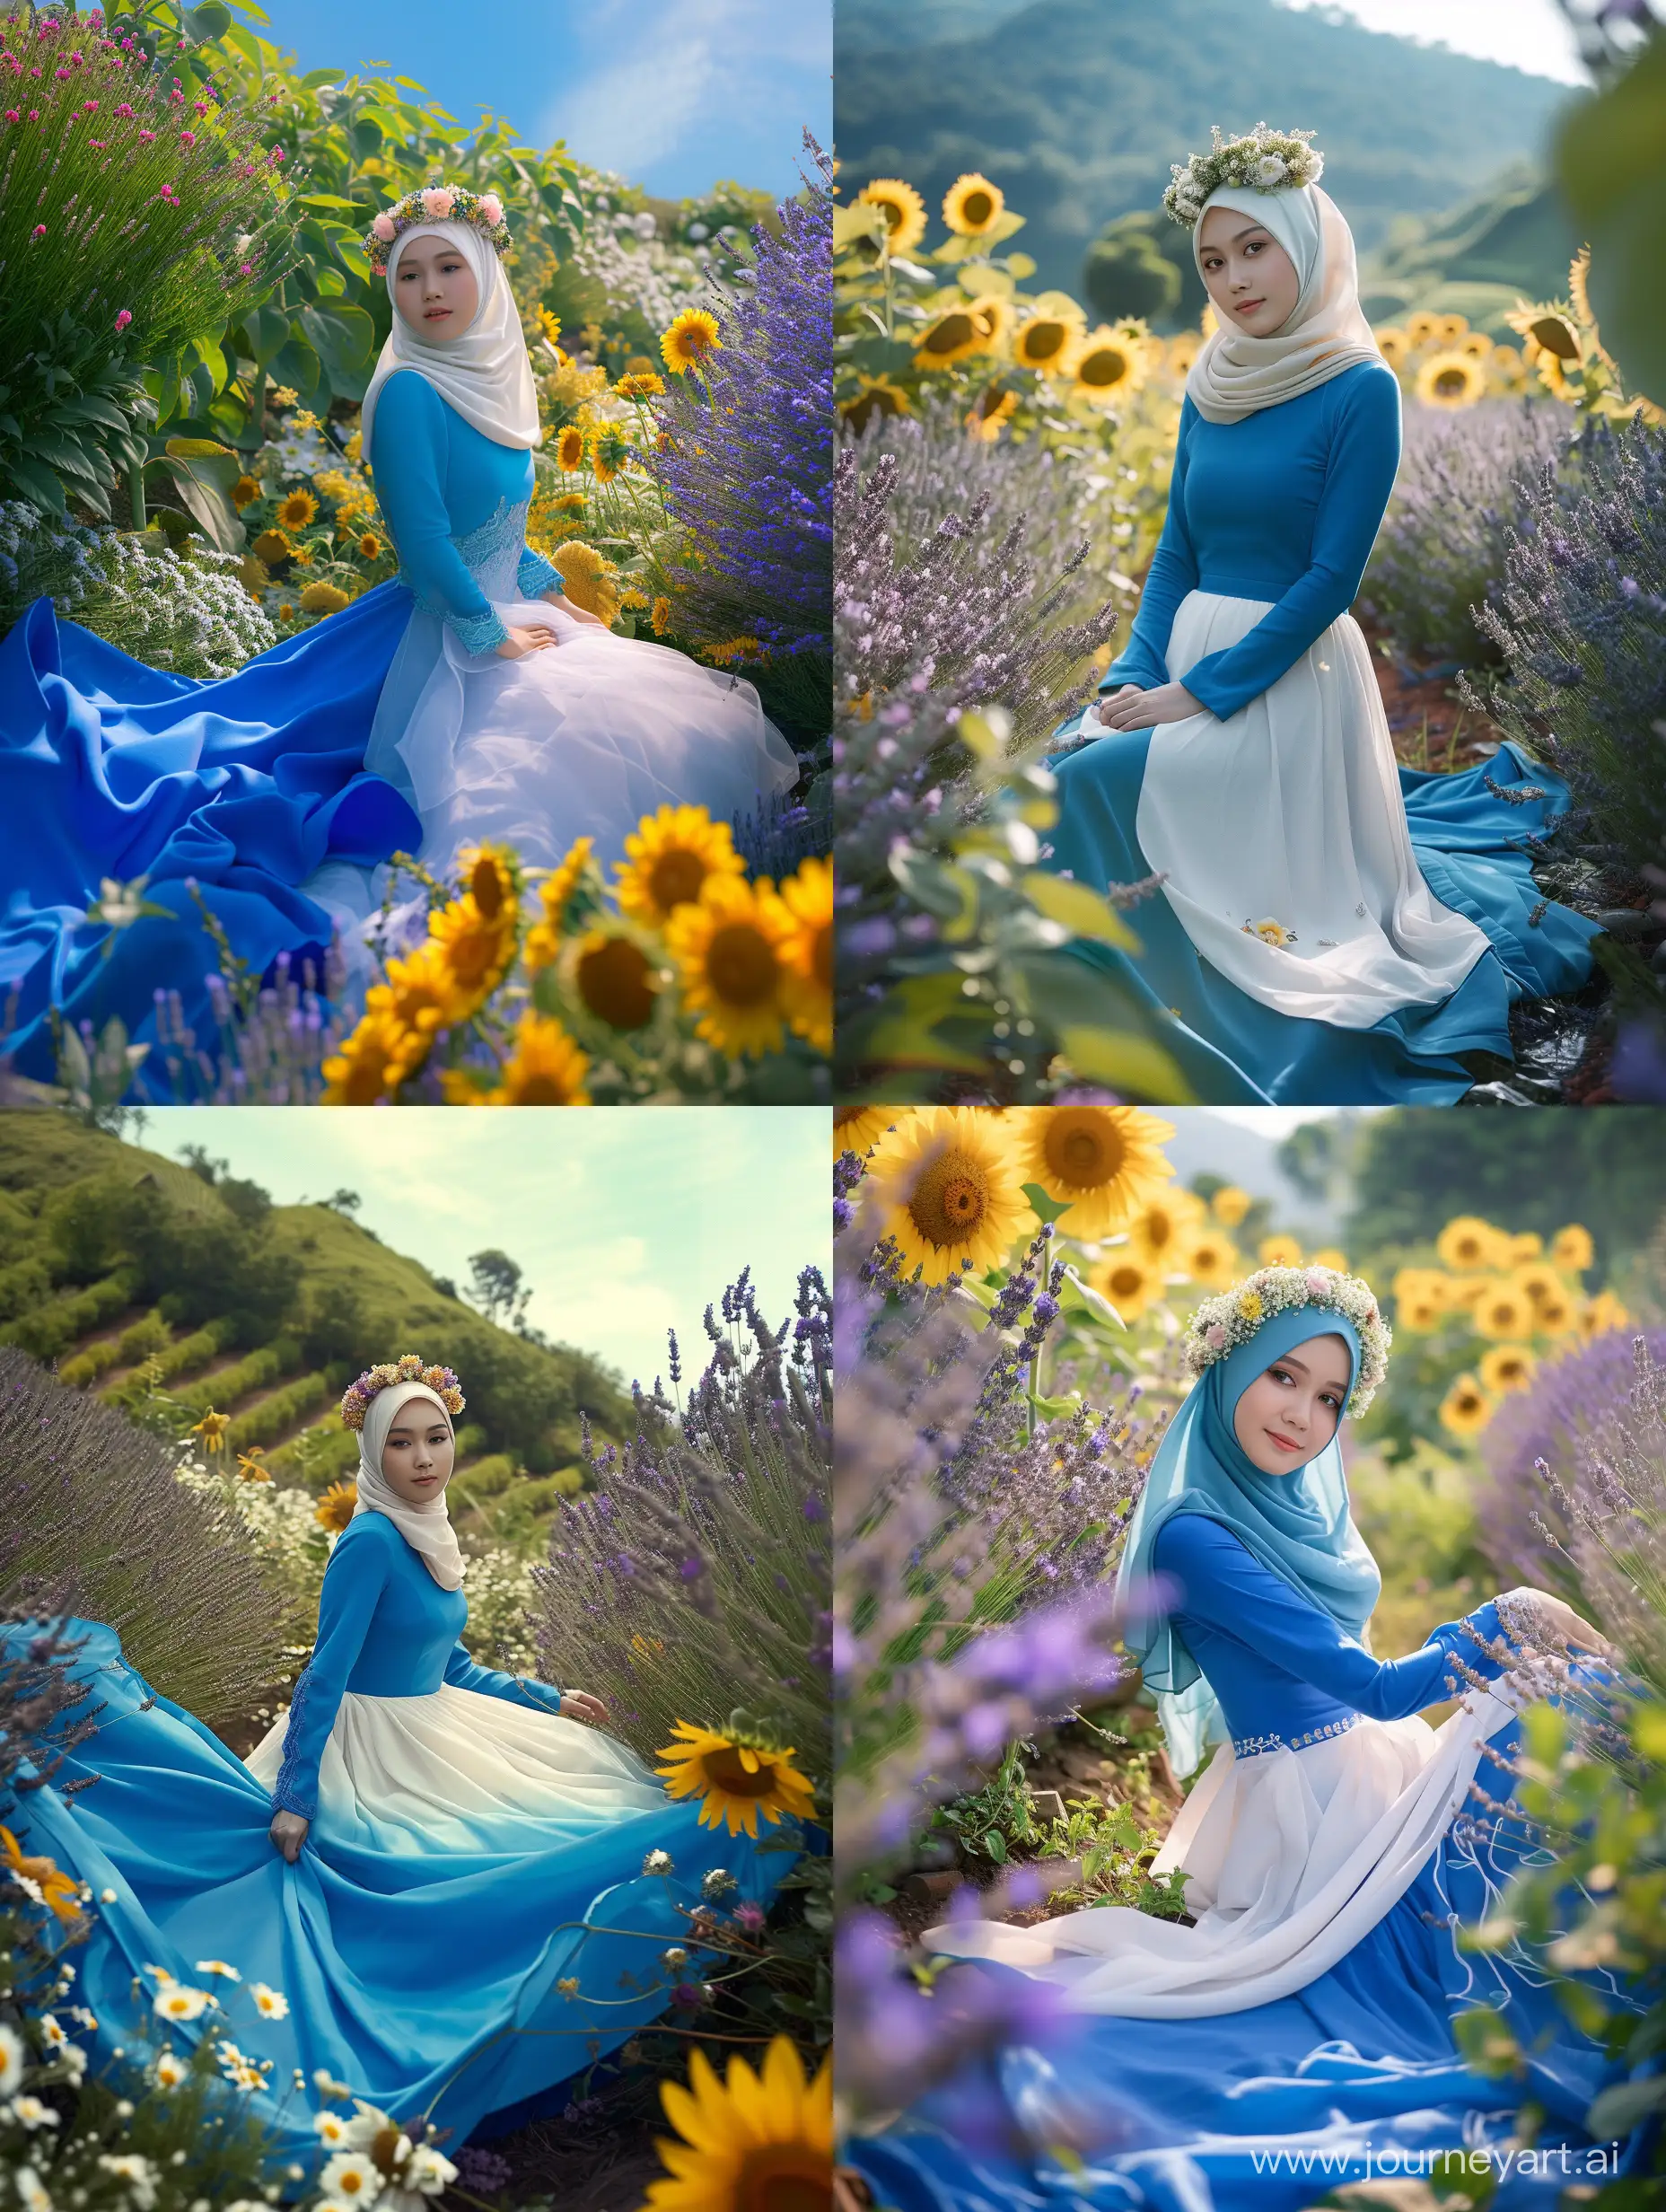 Indonesian-Woman-in-Blue-and-White-Dress-with-Flower-Crown-in-Flower-Garden-Portrait